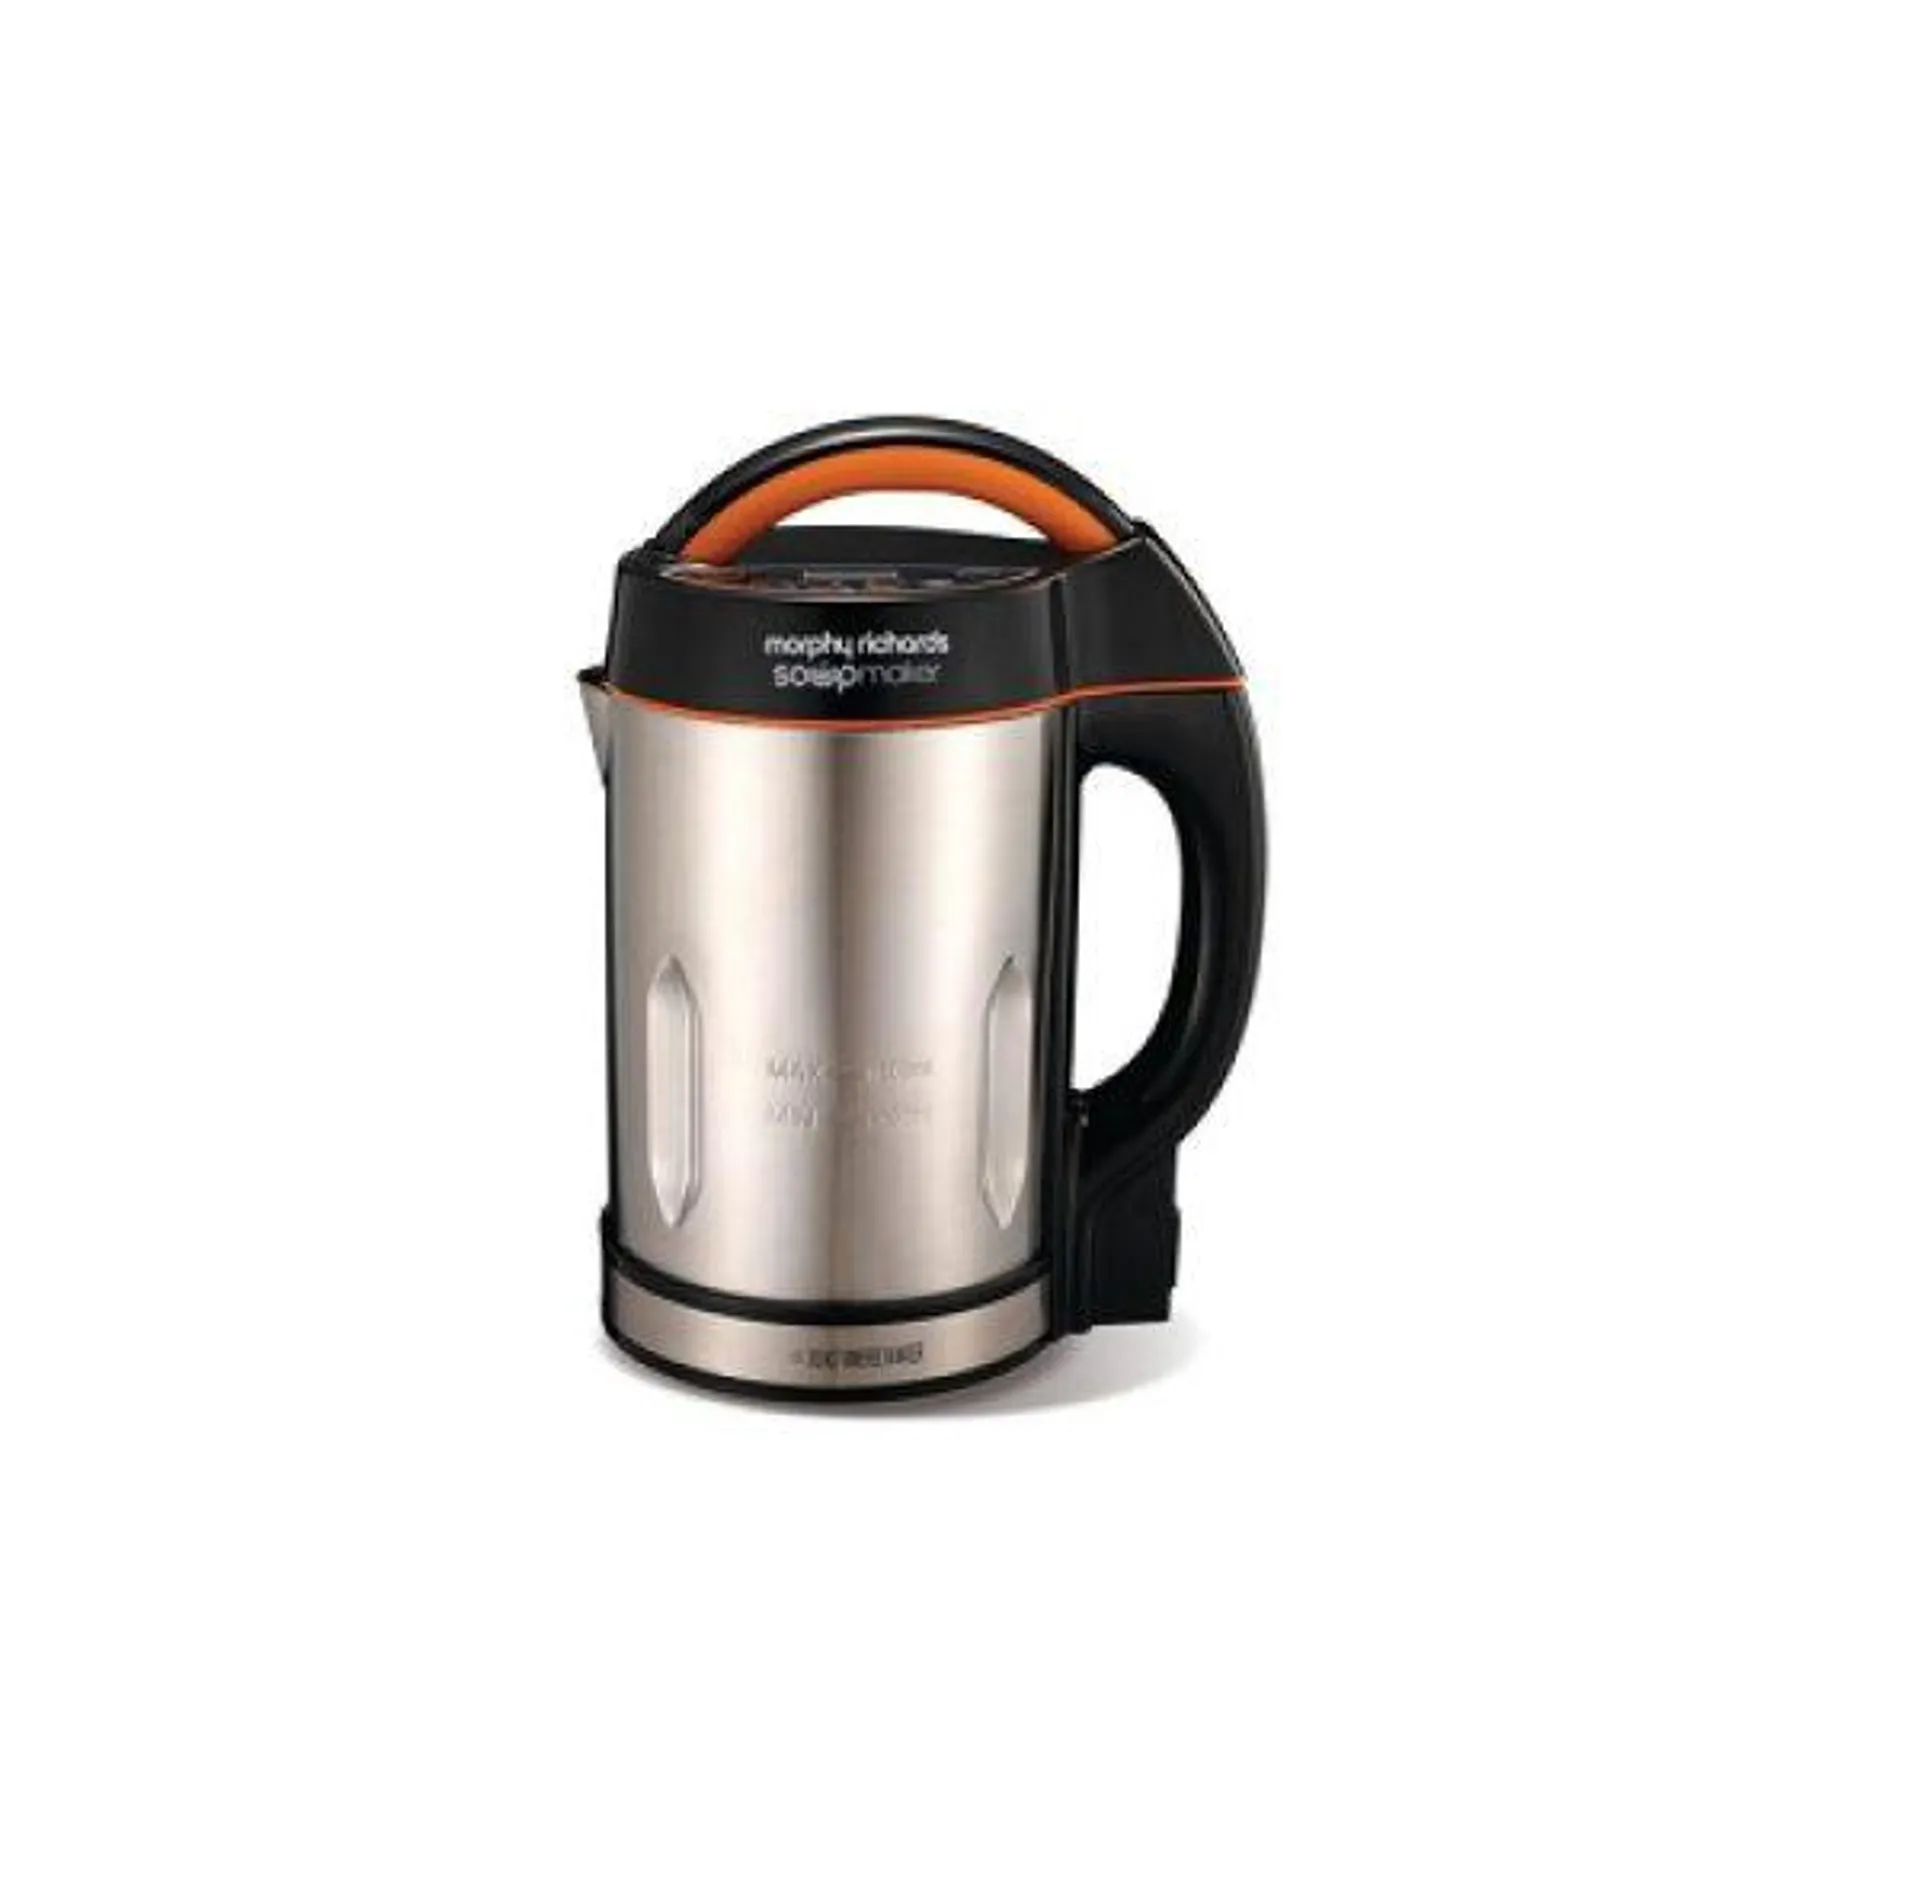 Morphy Richards Soup Maker – Stainless Steel